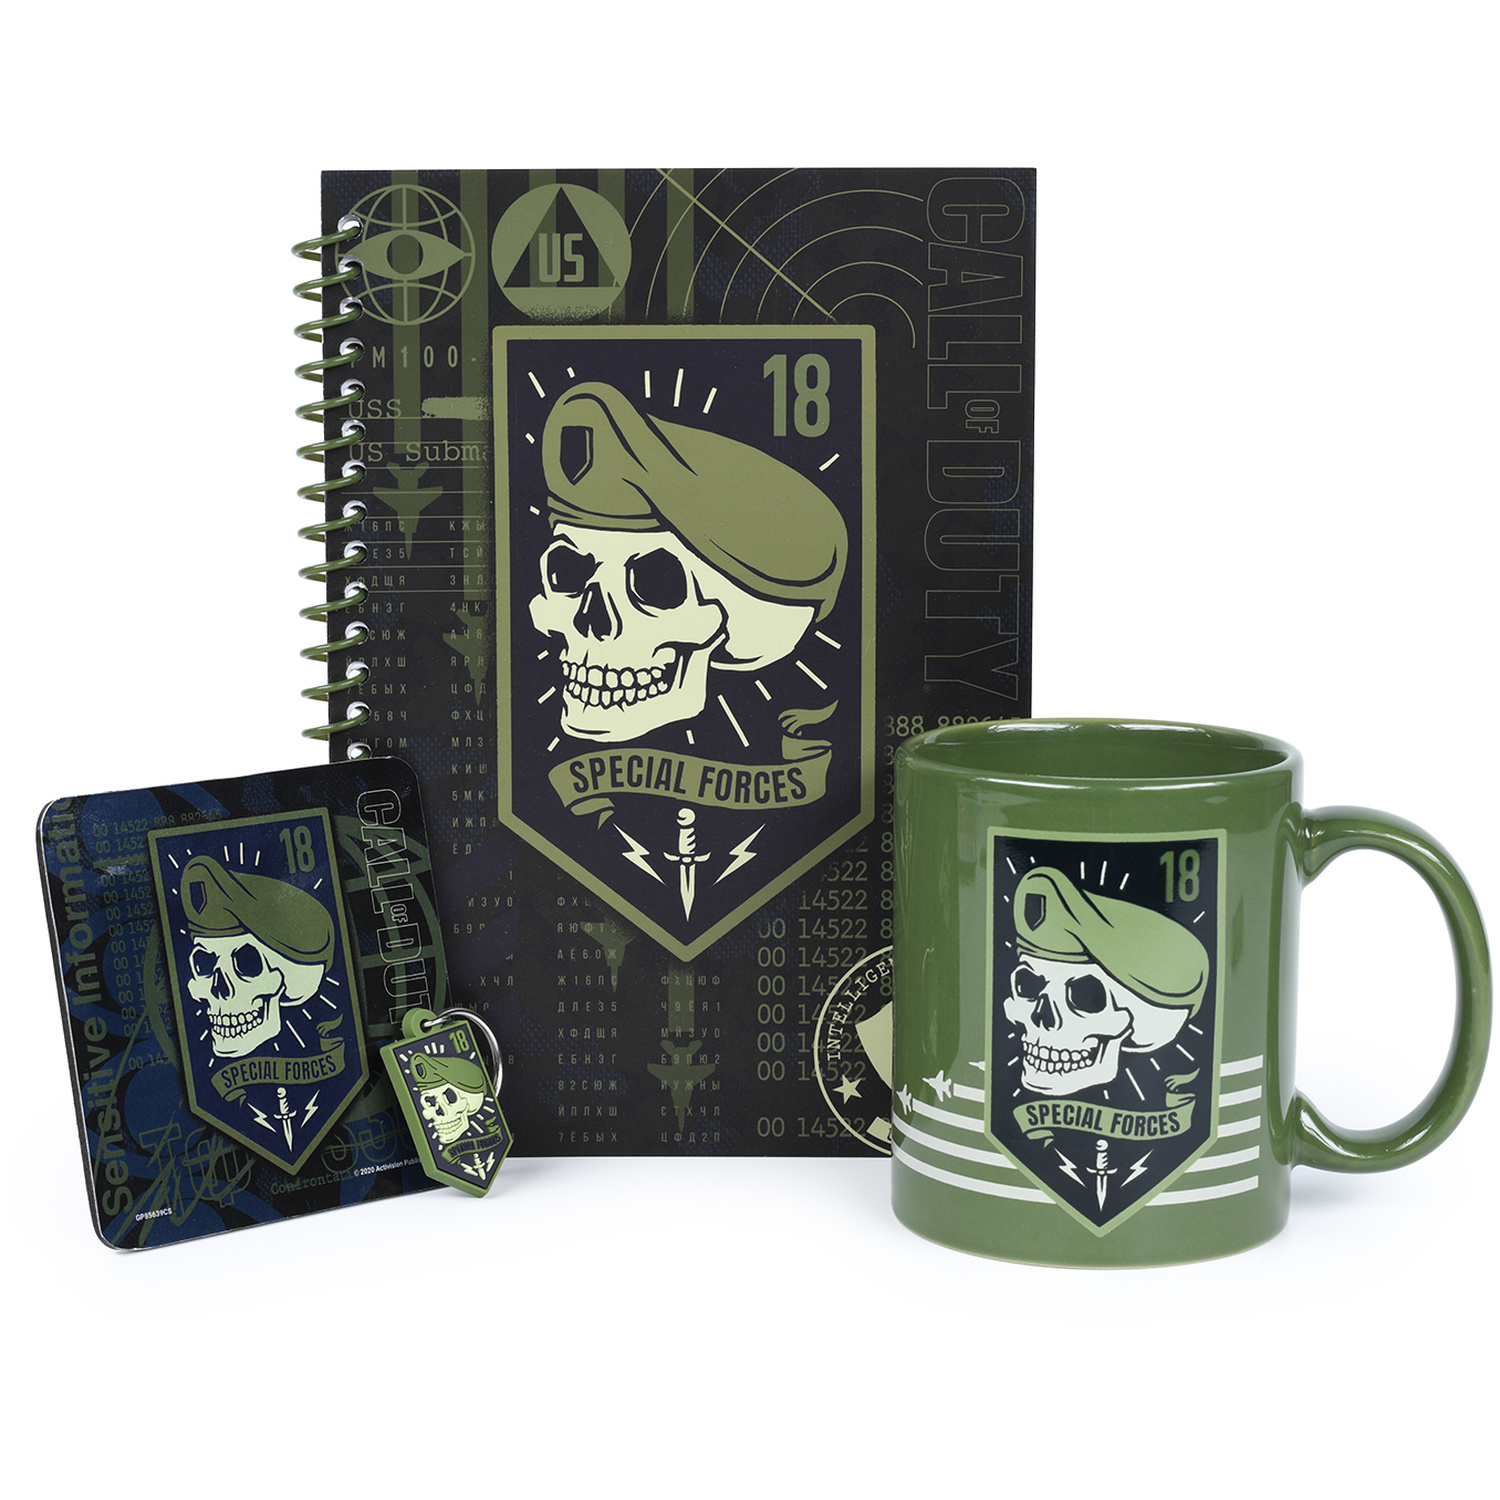 Call Of Duty Bumper Gift Set Image 1